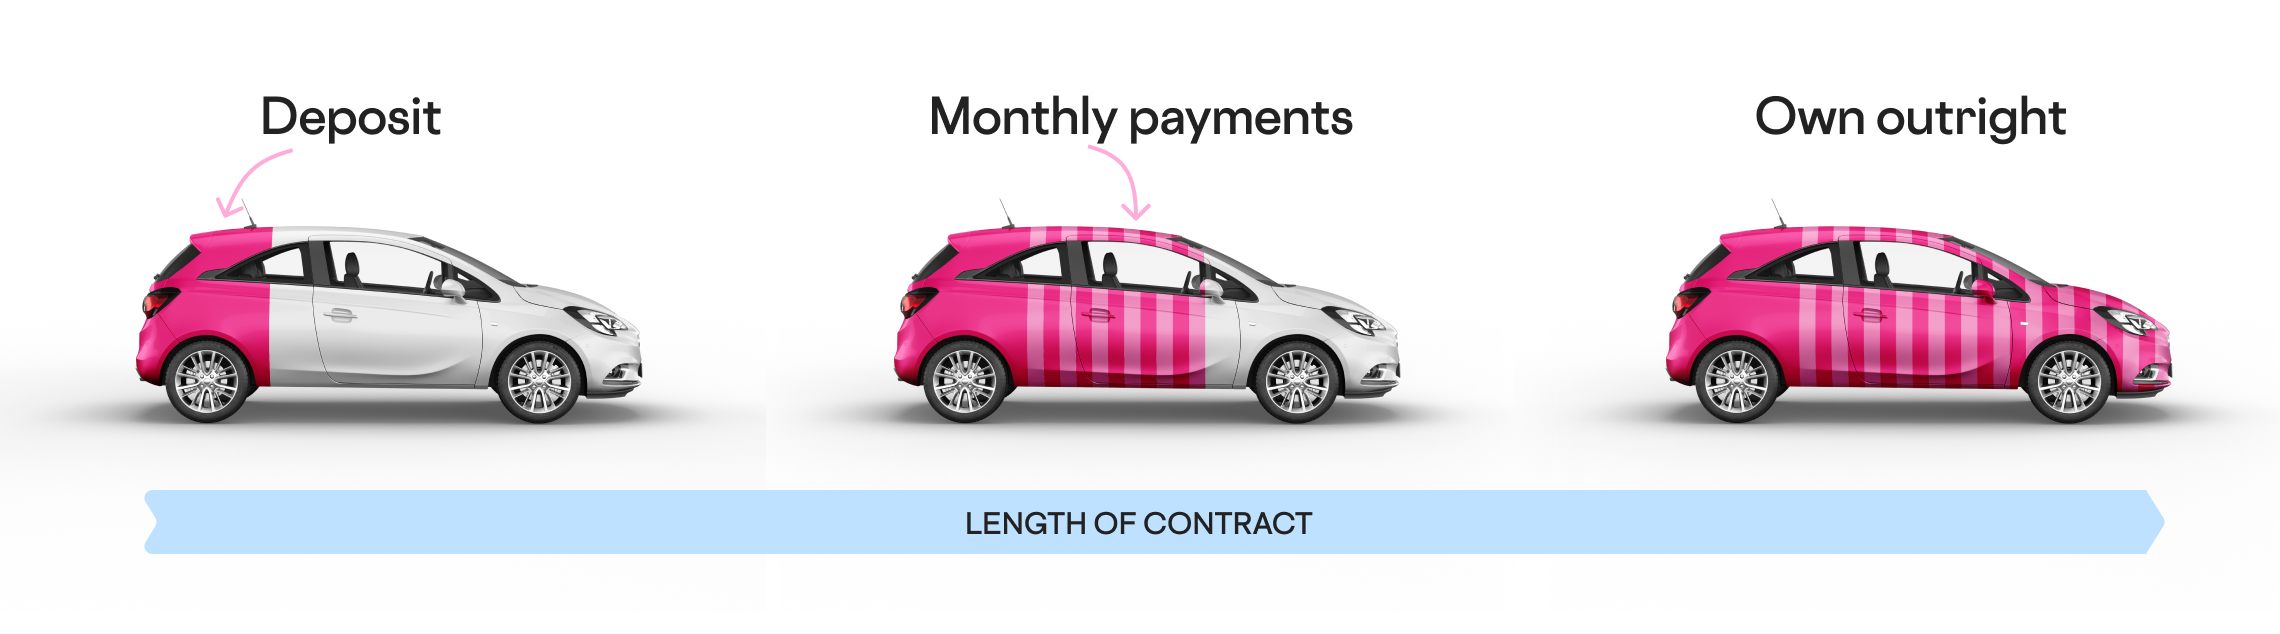 Diagram showing how hire purchase finance works